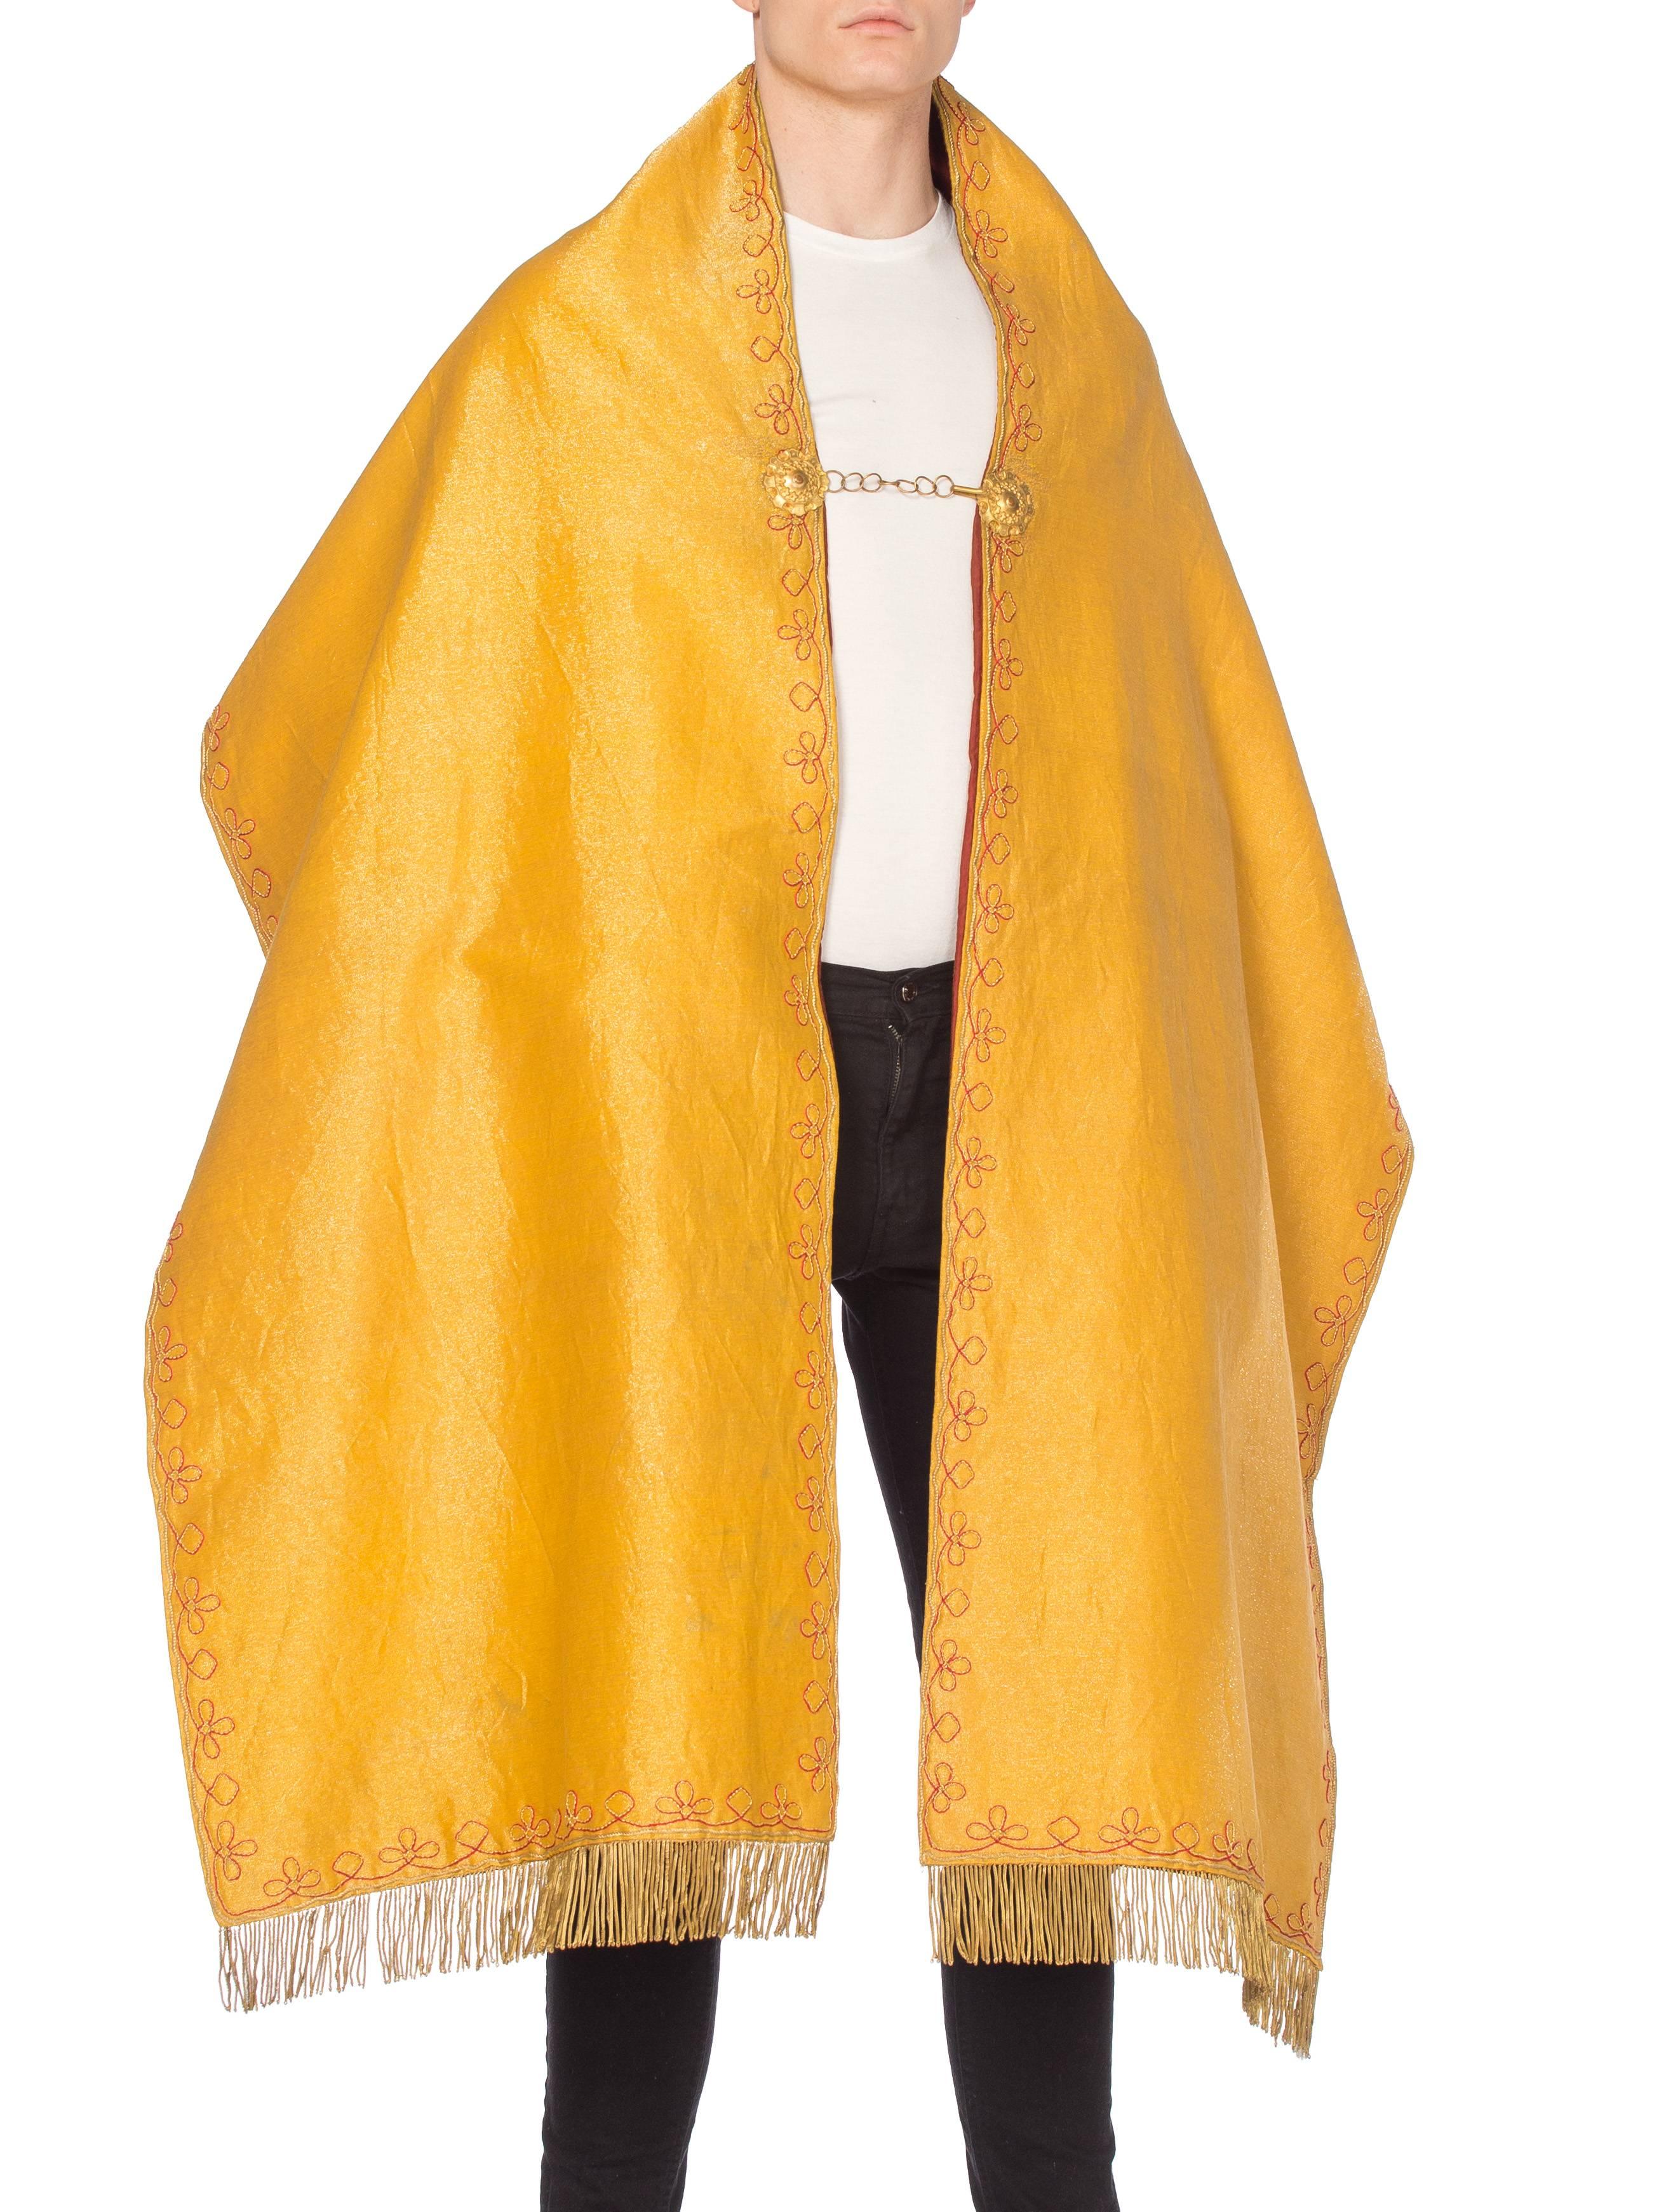 Victorian Gold & Cotton Embroidered Catholic Mantle Cape With Fringe For Sale 1